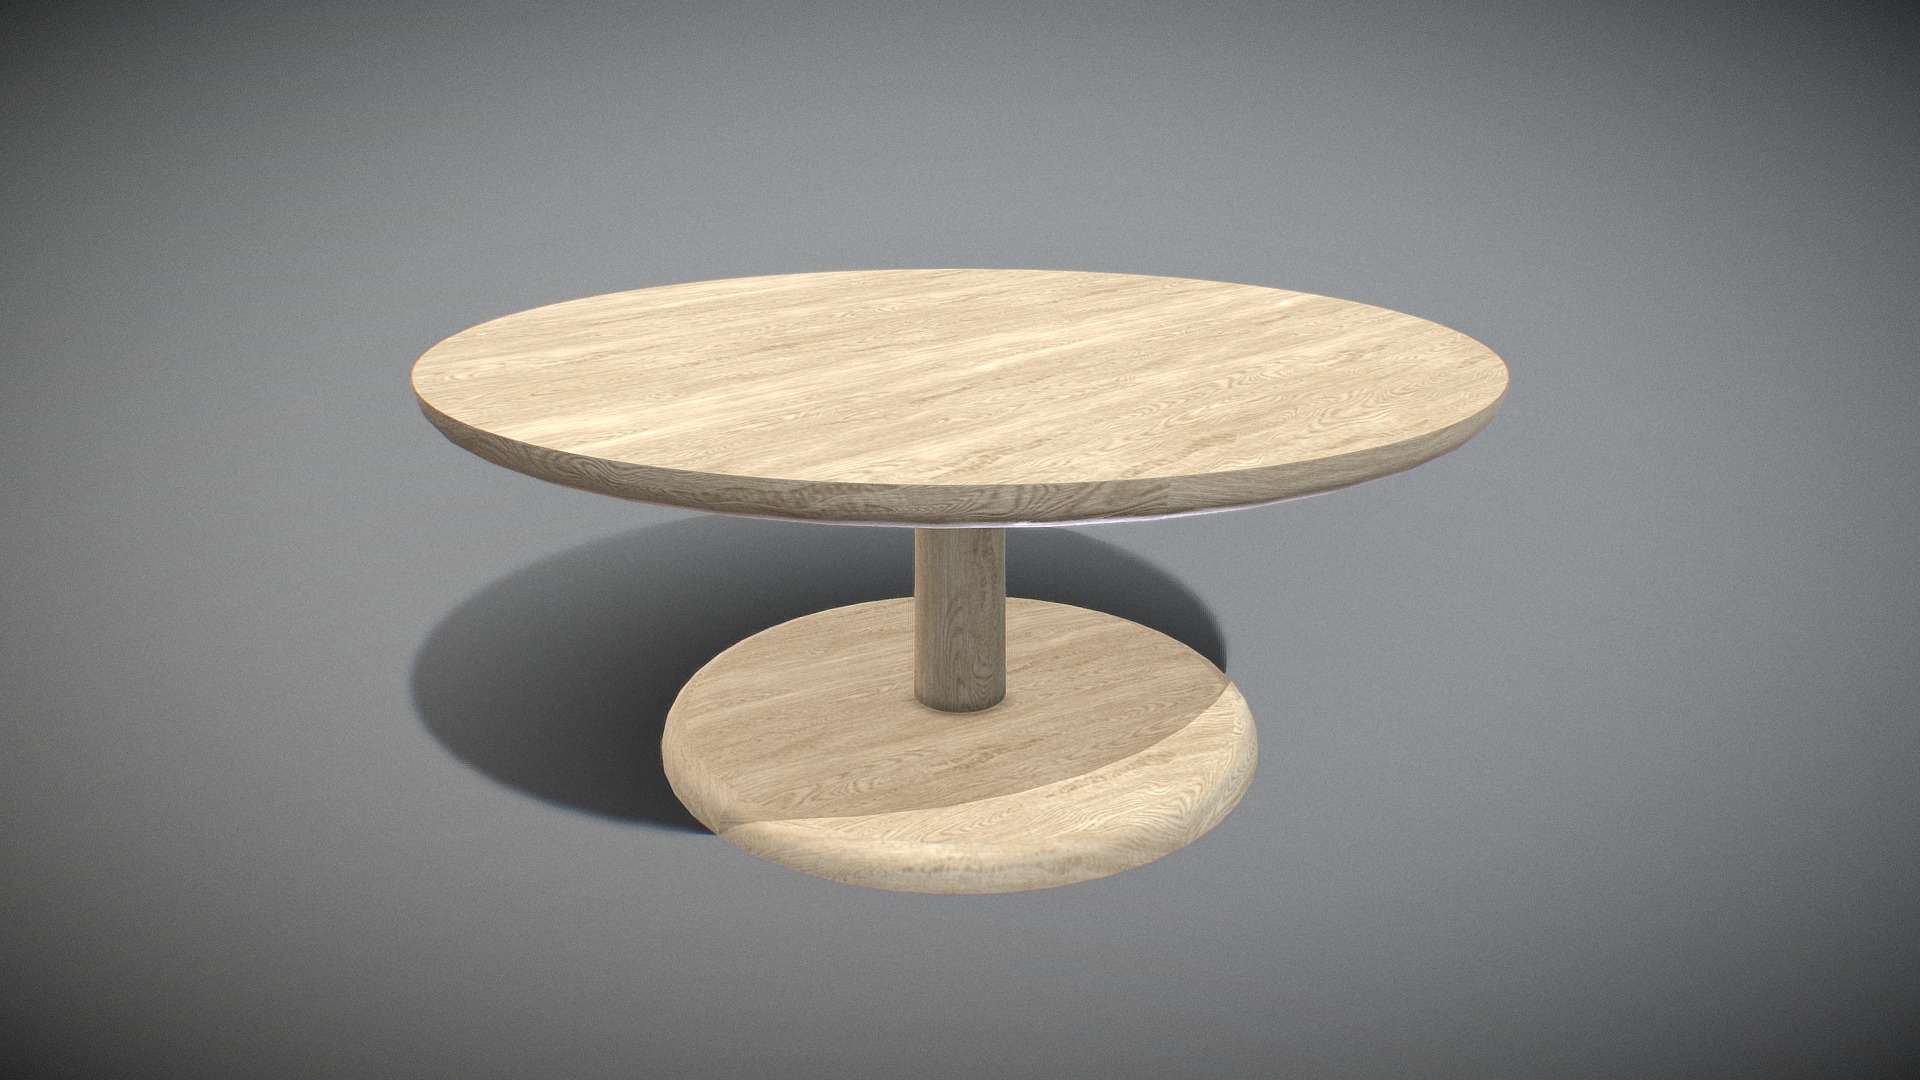 3D model PON Table 1295-Oak - This is a 3D model of the PON Table 1295-Oak. The 3D model is about a wooden table on a grey background.